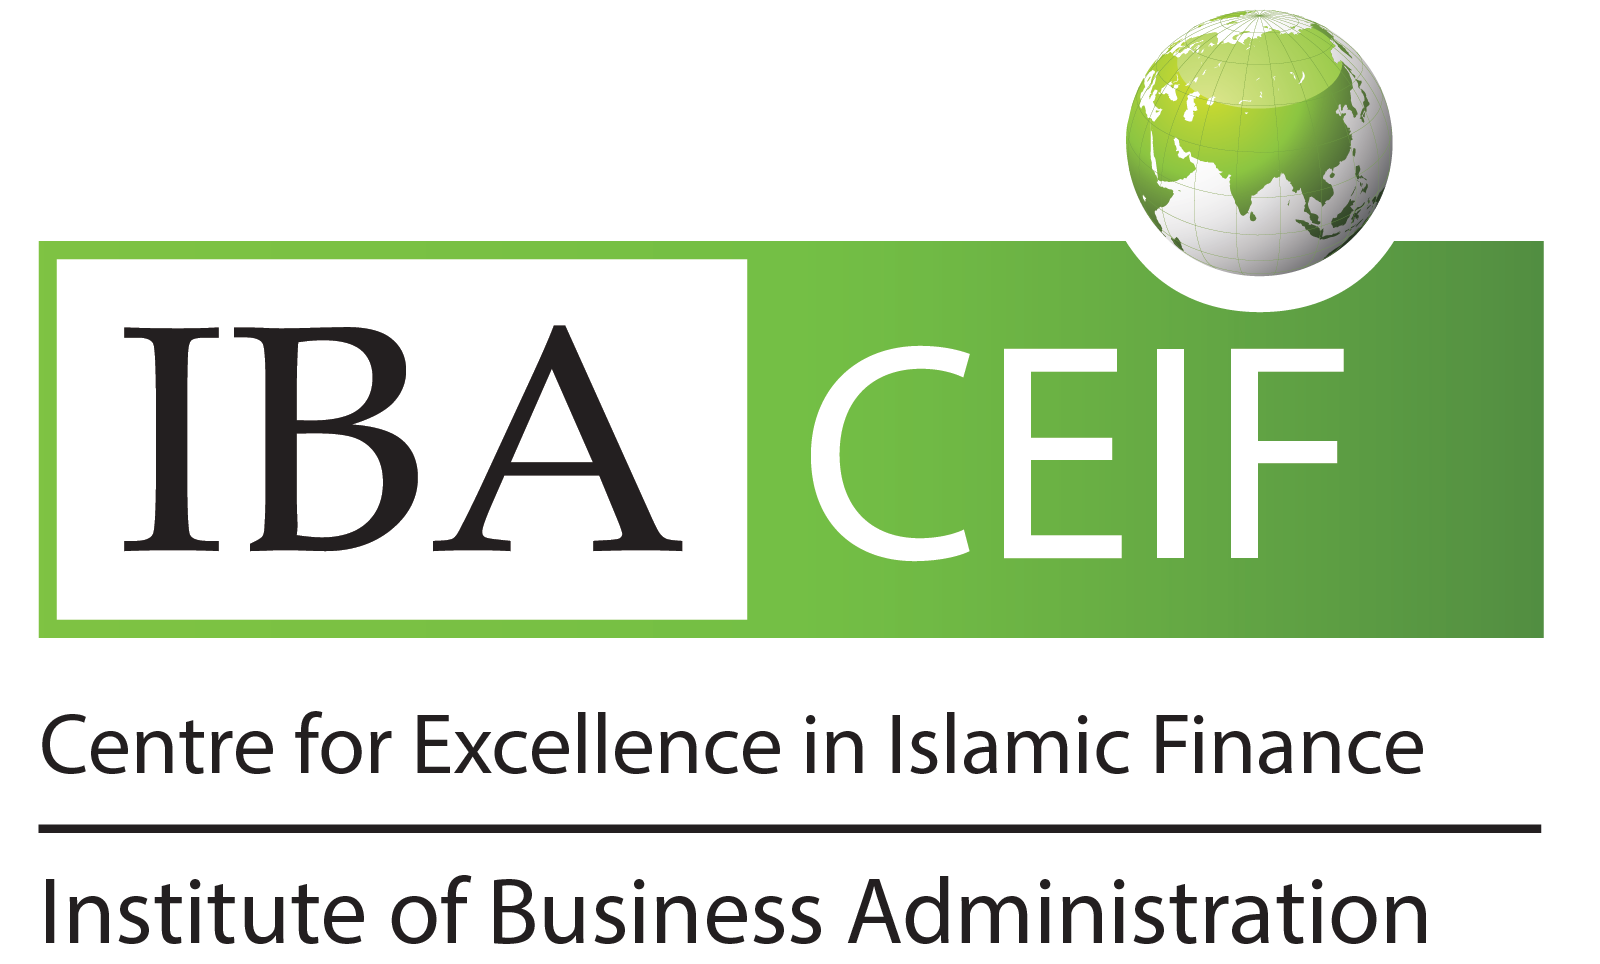 Centre for Excellence in Islamic Finance (CEIF), IBA